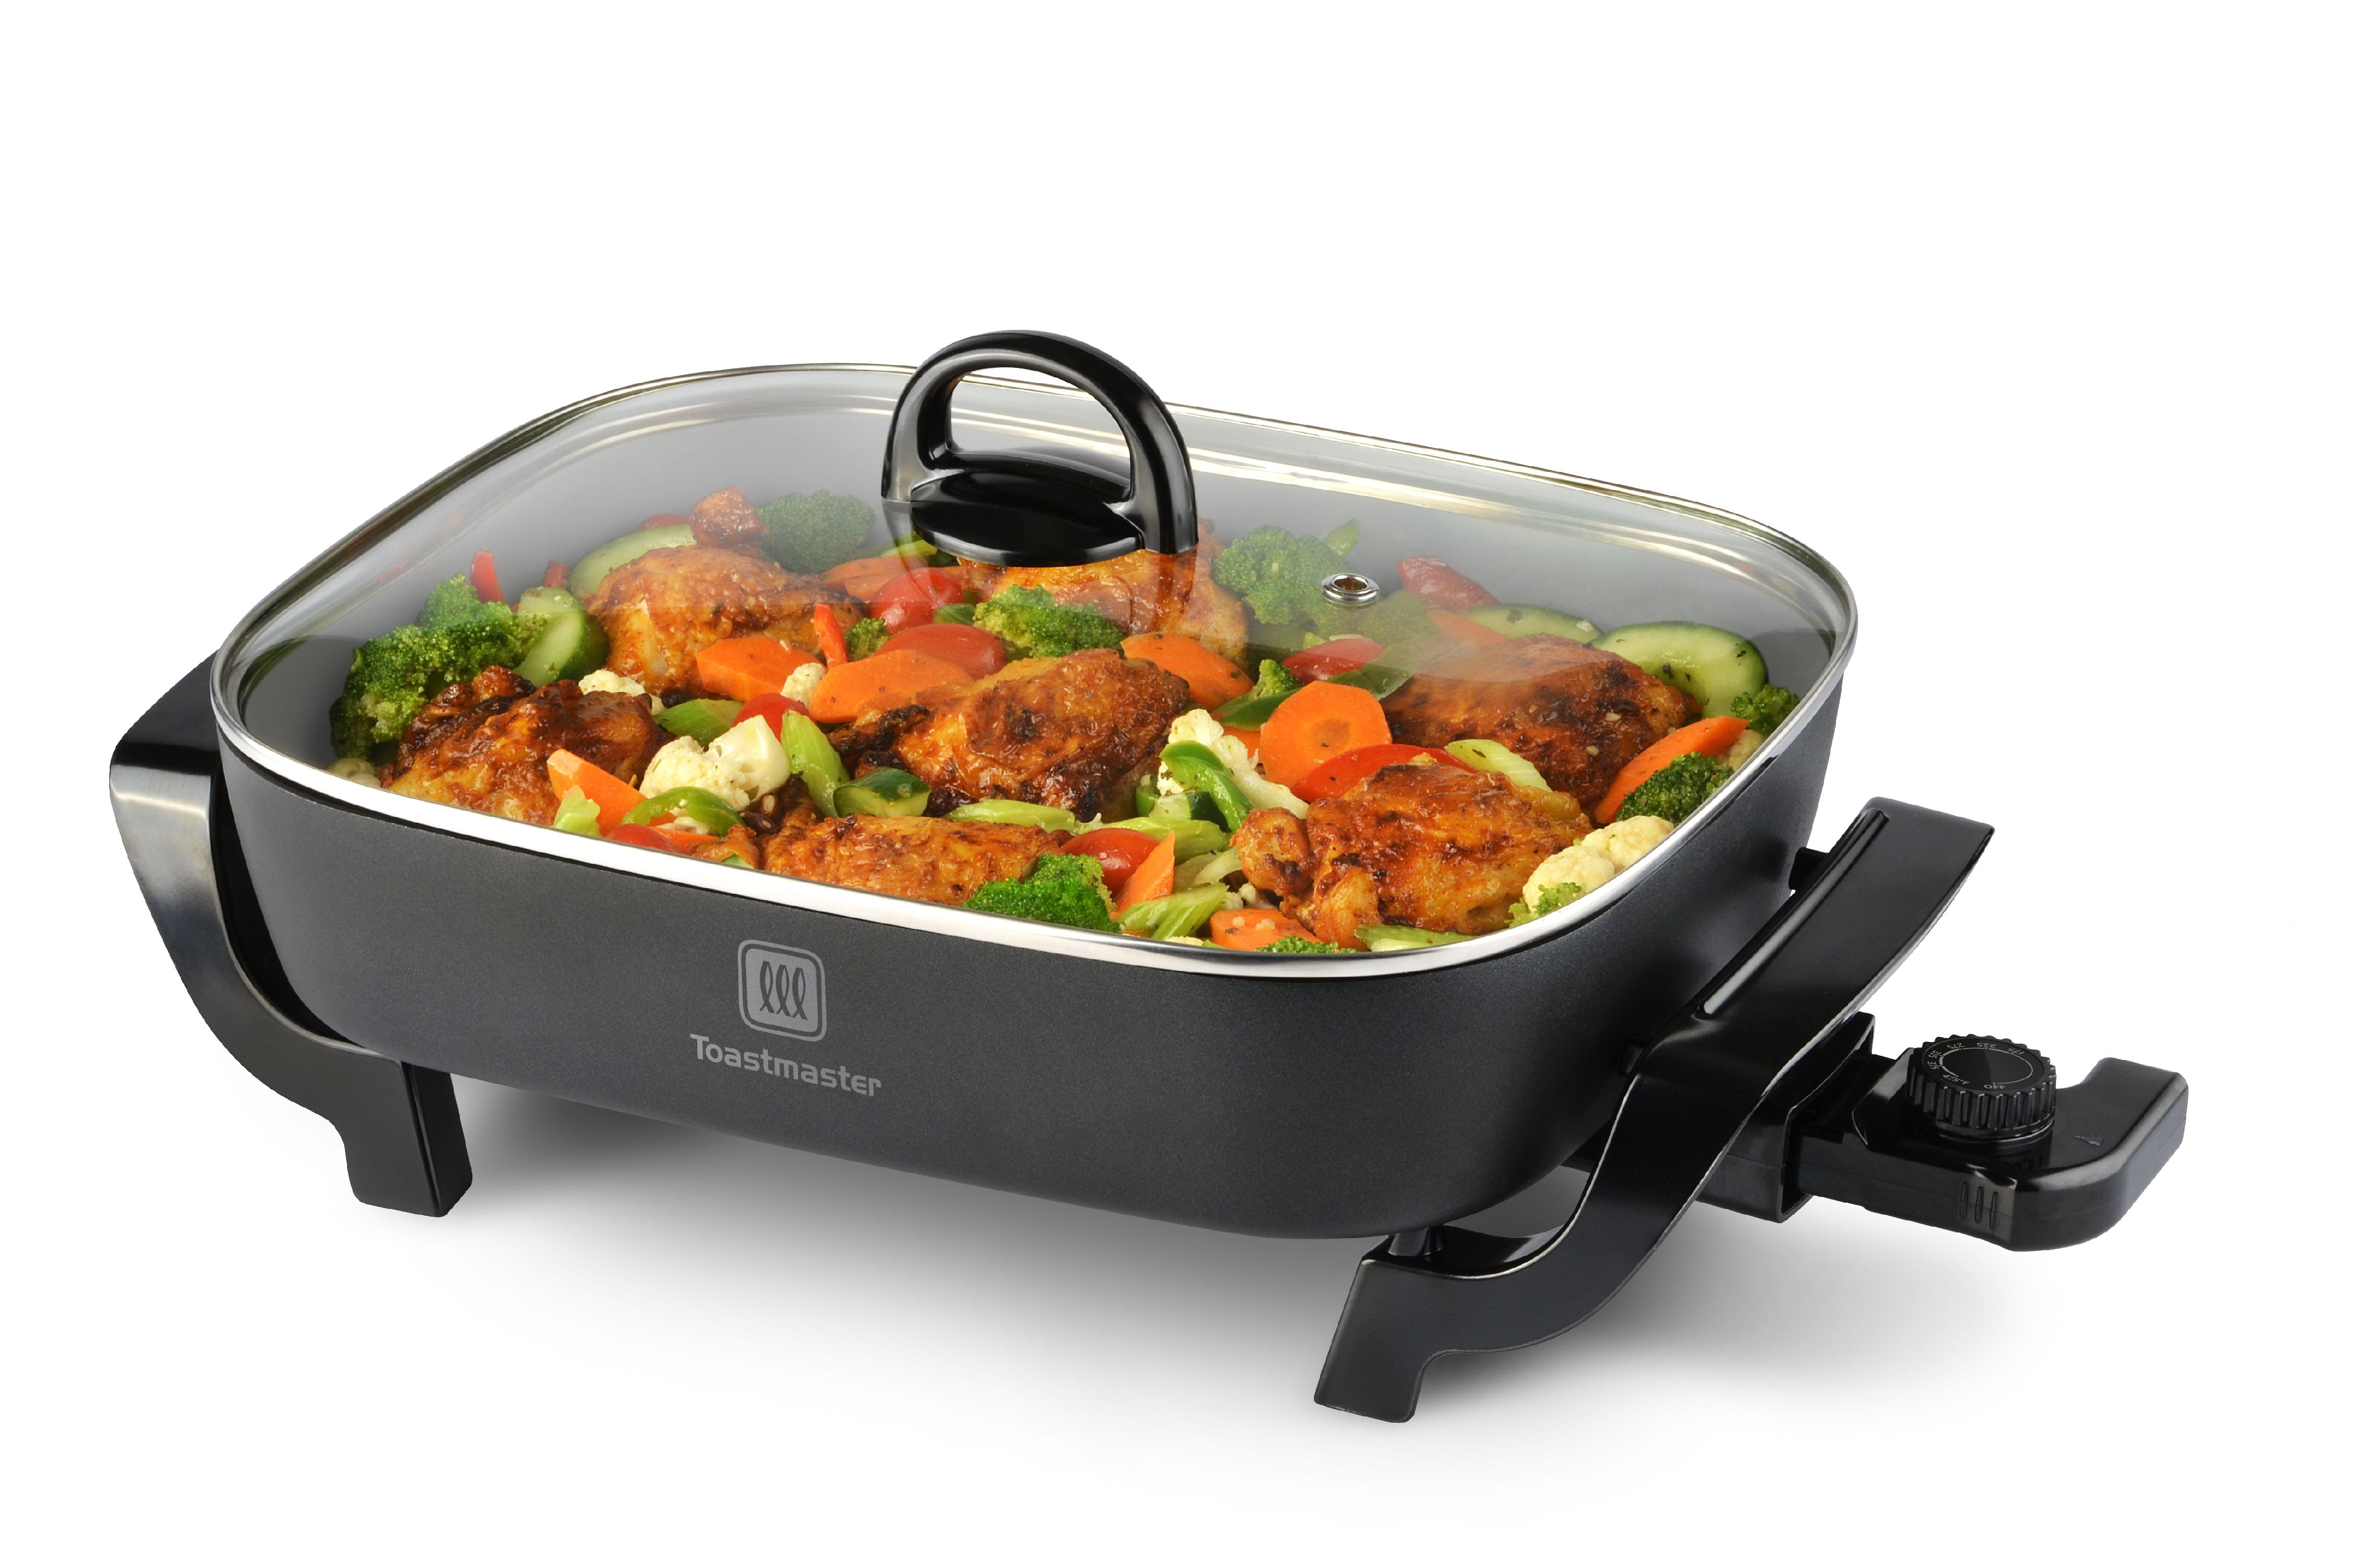 toastmaster-16-electric-skillet-with-ceramic-coating-walmart